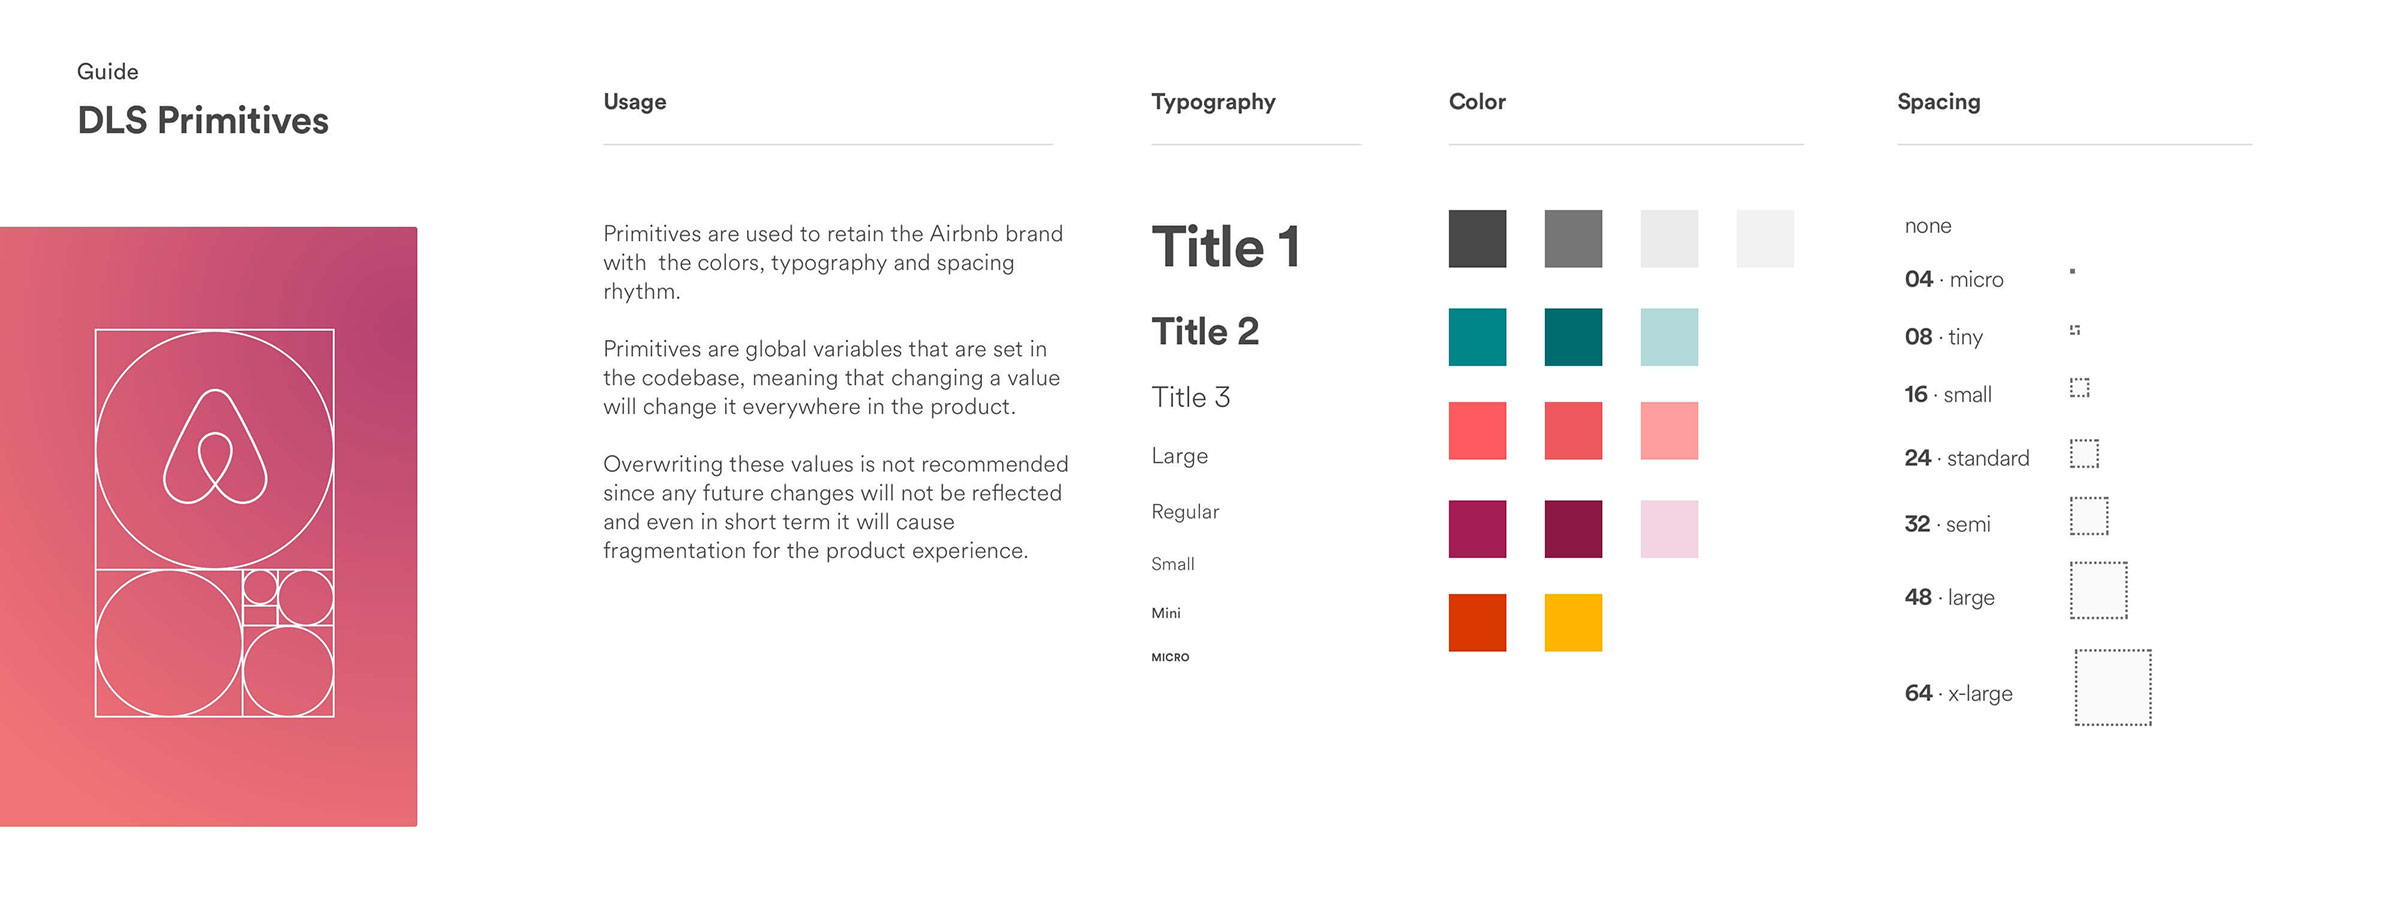 A section of the Airbnb design system | Source: www.designsystems.com